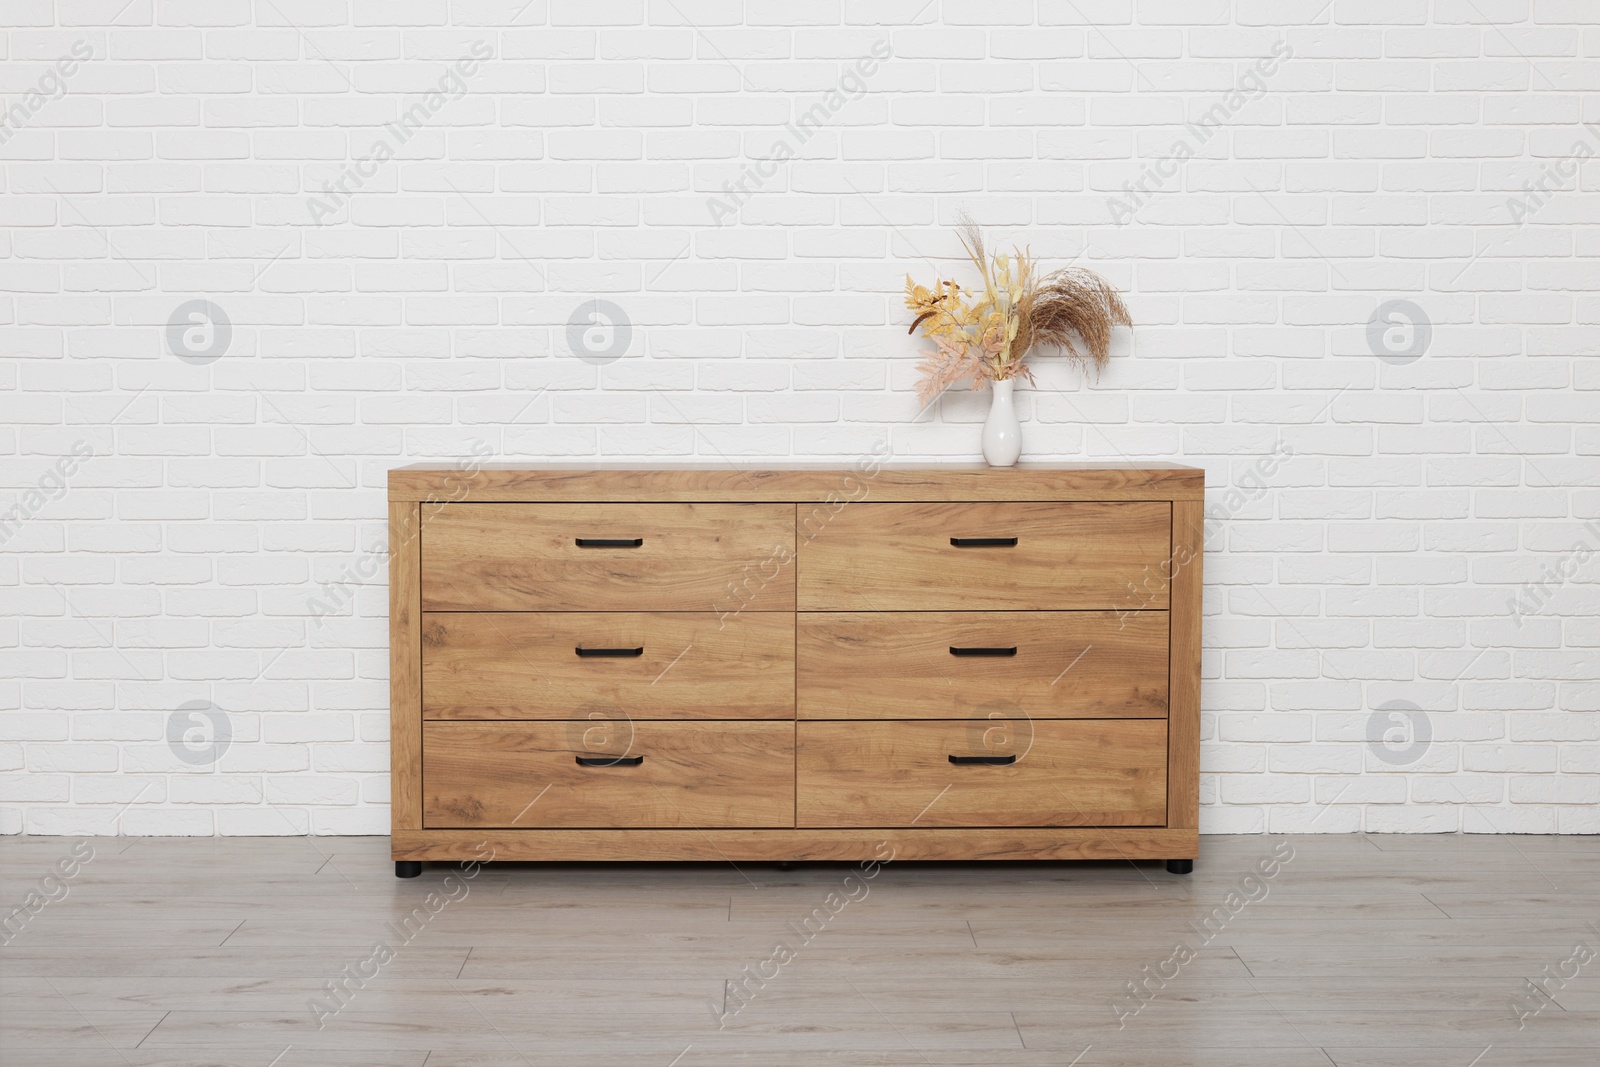 Photo of Wooden chest of drawers and vase near white brick wall. Interior design